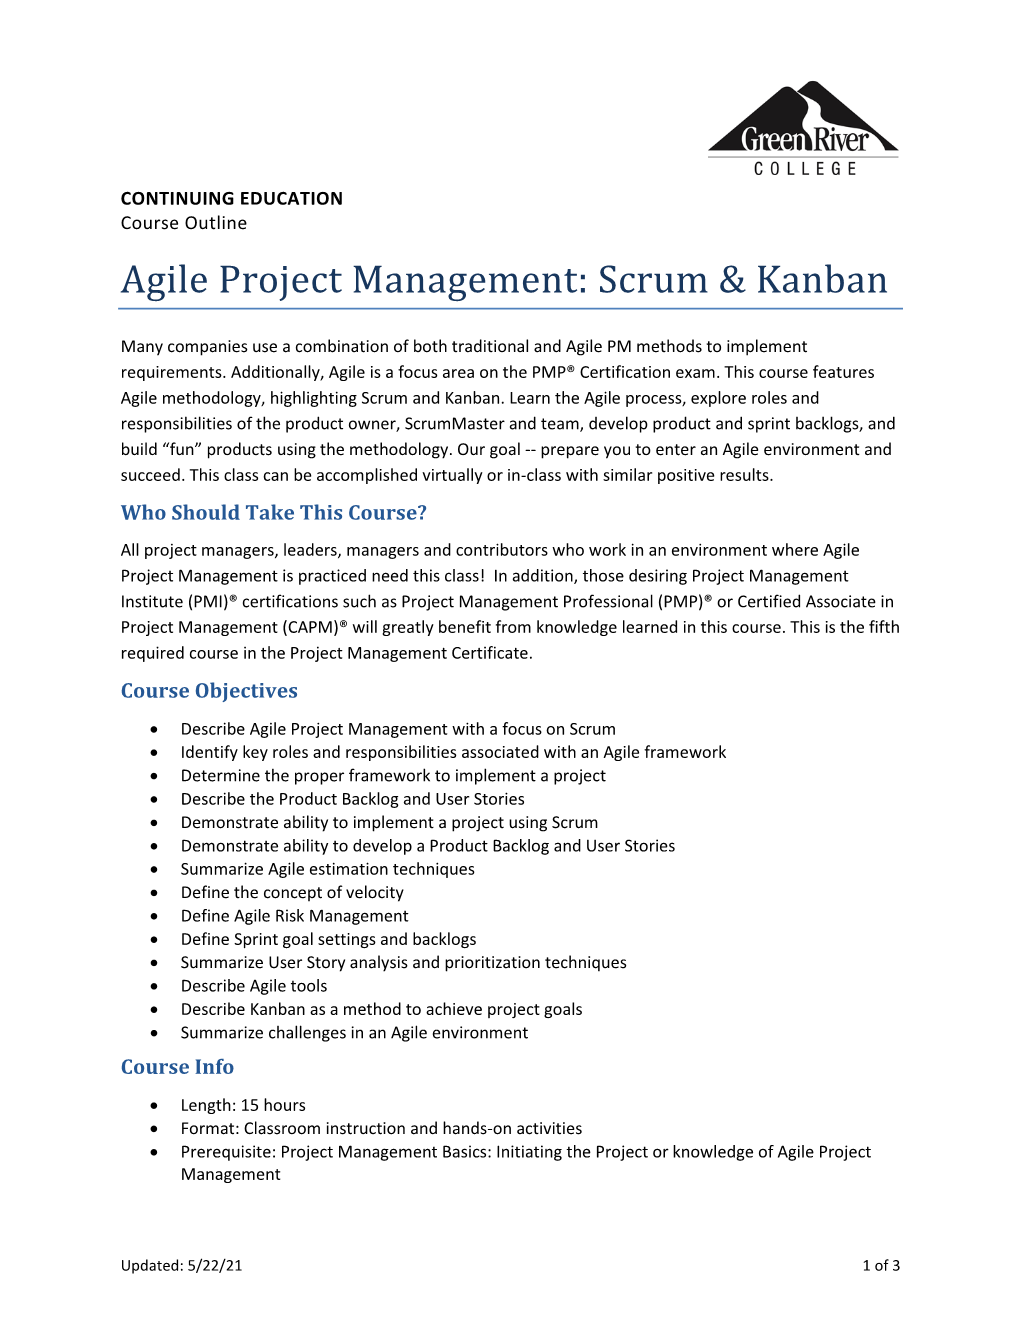 Agile Project Management: Scrum and Kanban